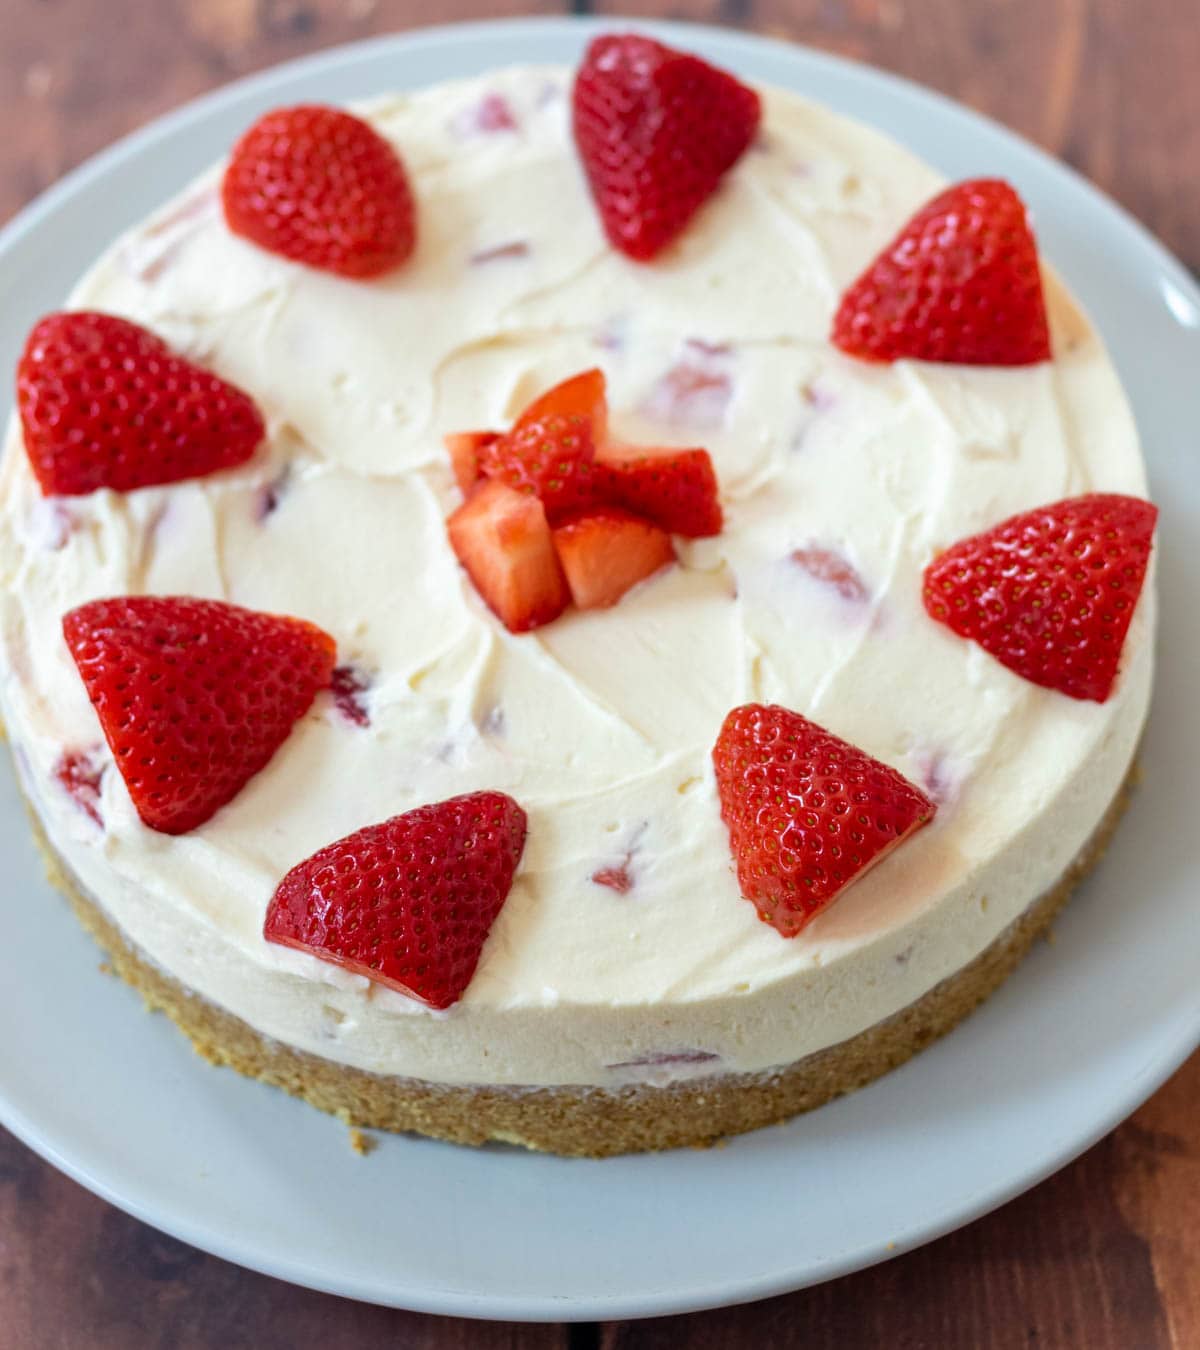 Easy no-bake strawberry cheesecake decorated and served on a plate.